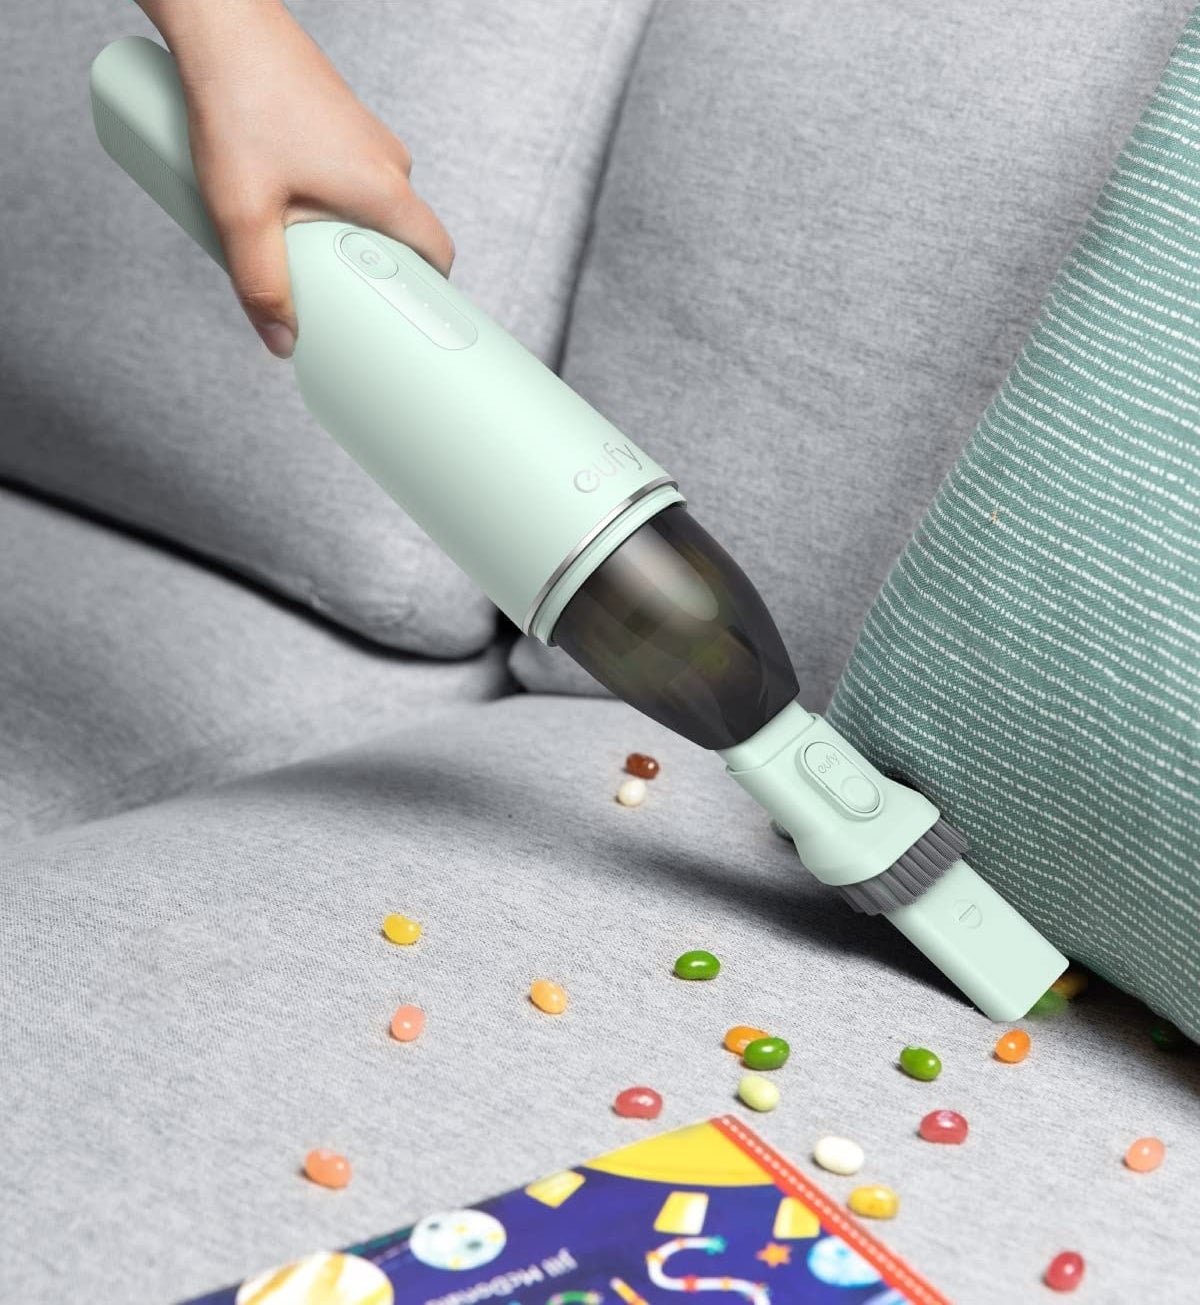 a person using the vacuum to clean up spilled candy